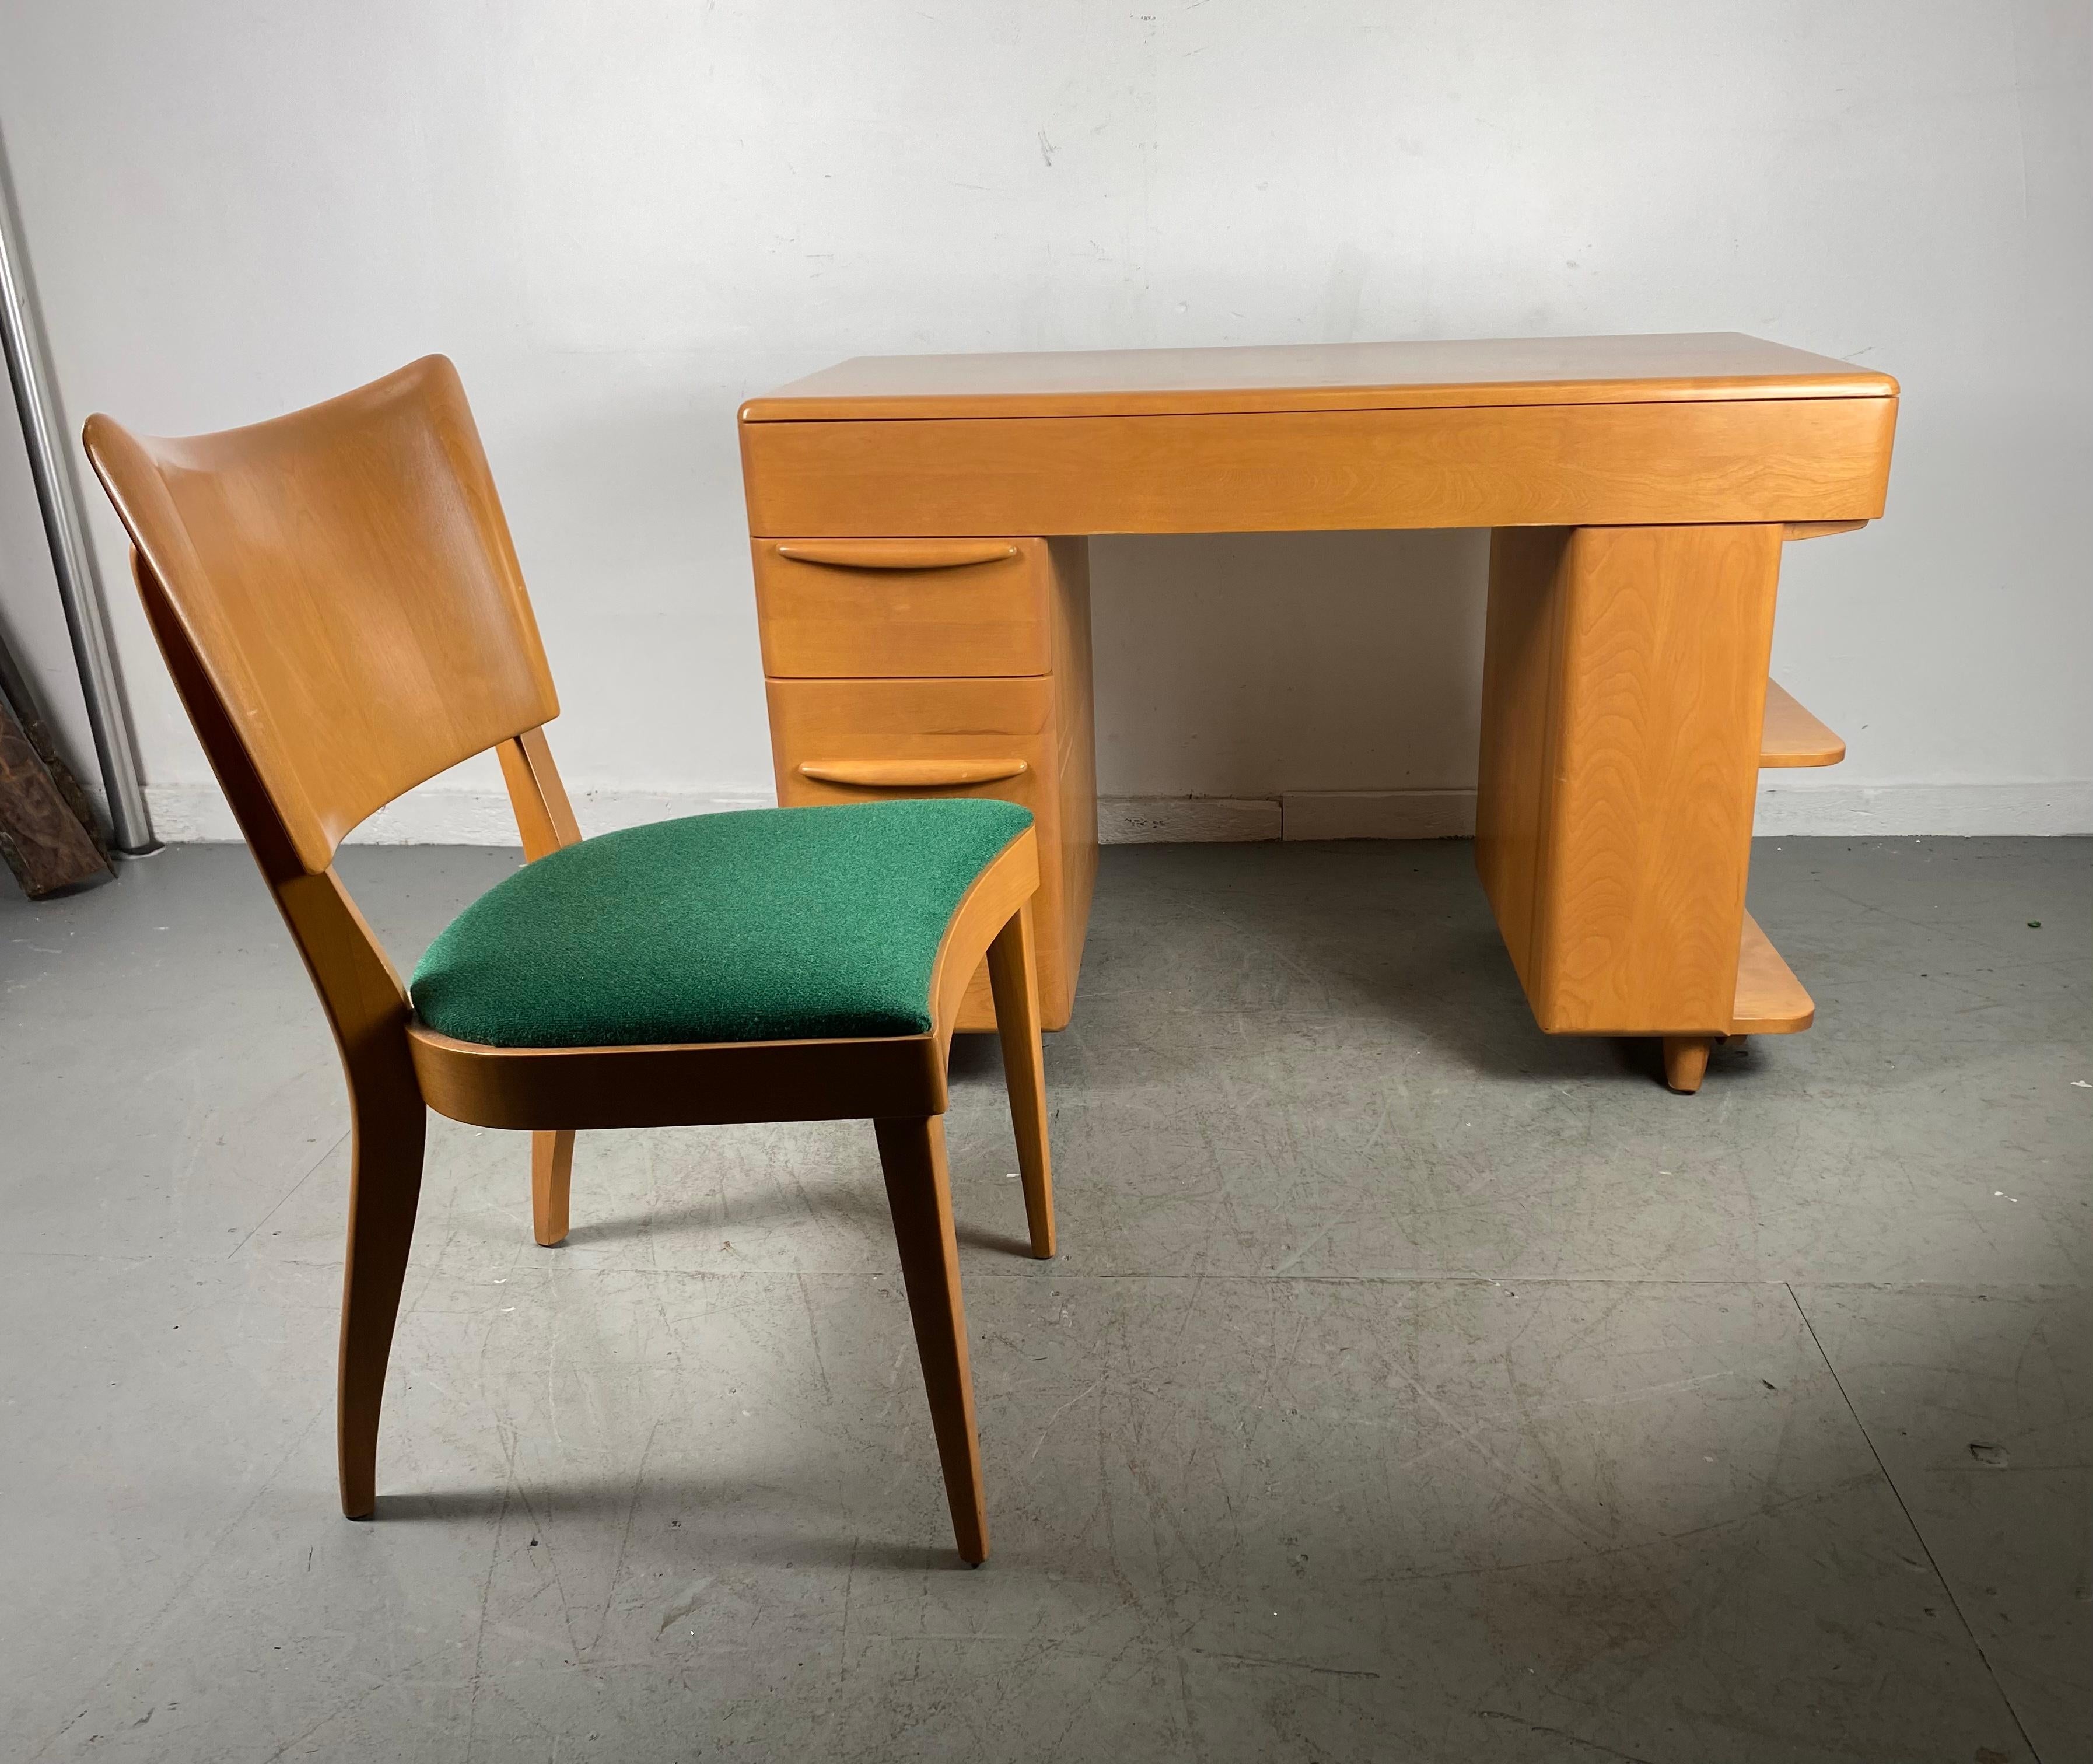 Classic Mid Century Modern Heywood Wakefield desk and chair, Amazing design, Superior quality and construction, Solid birch wood, Featuring full top drawer, large file drawer. Bookcase side, Retains original 